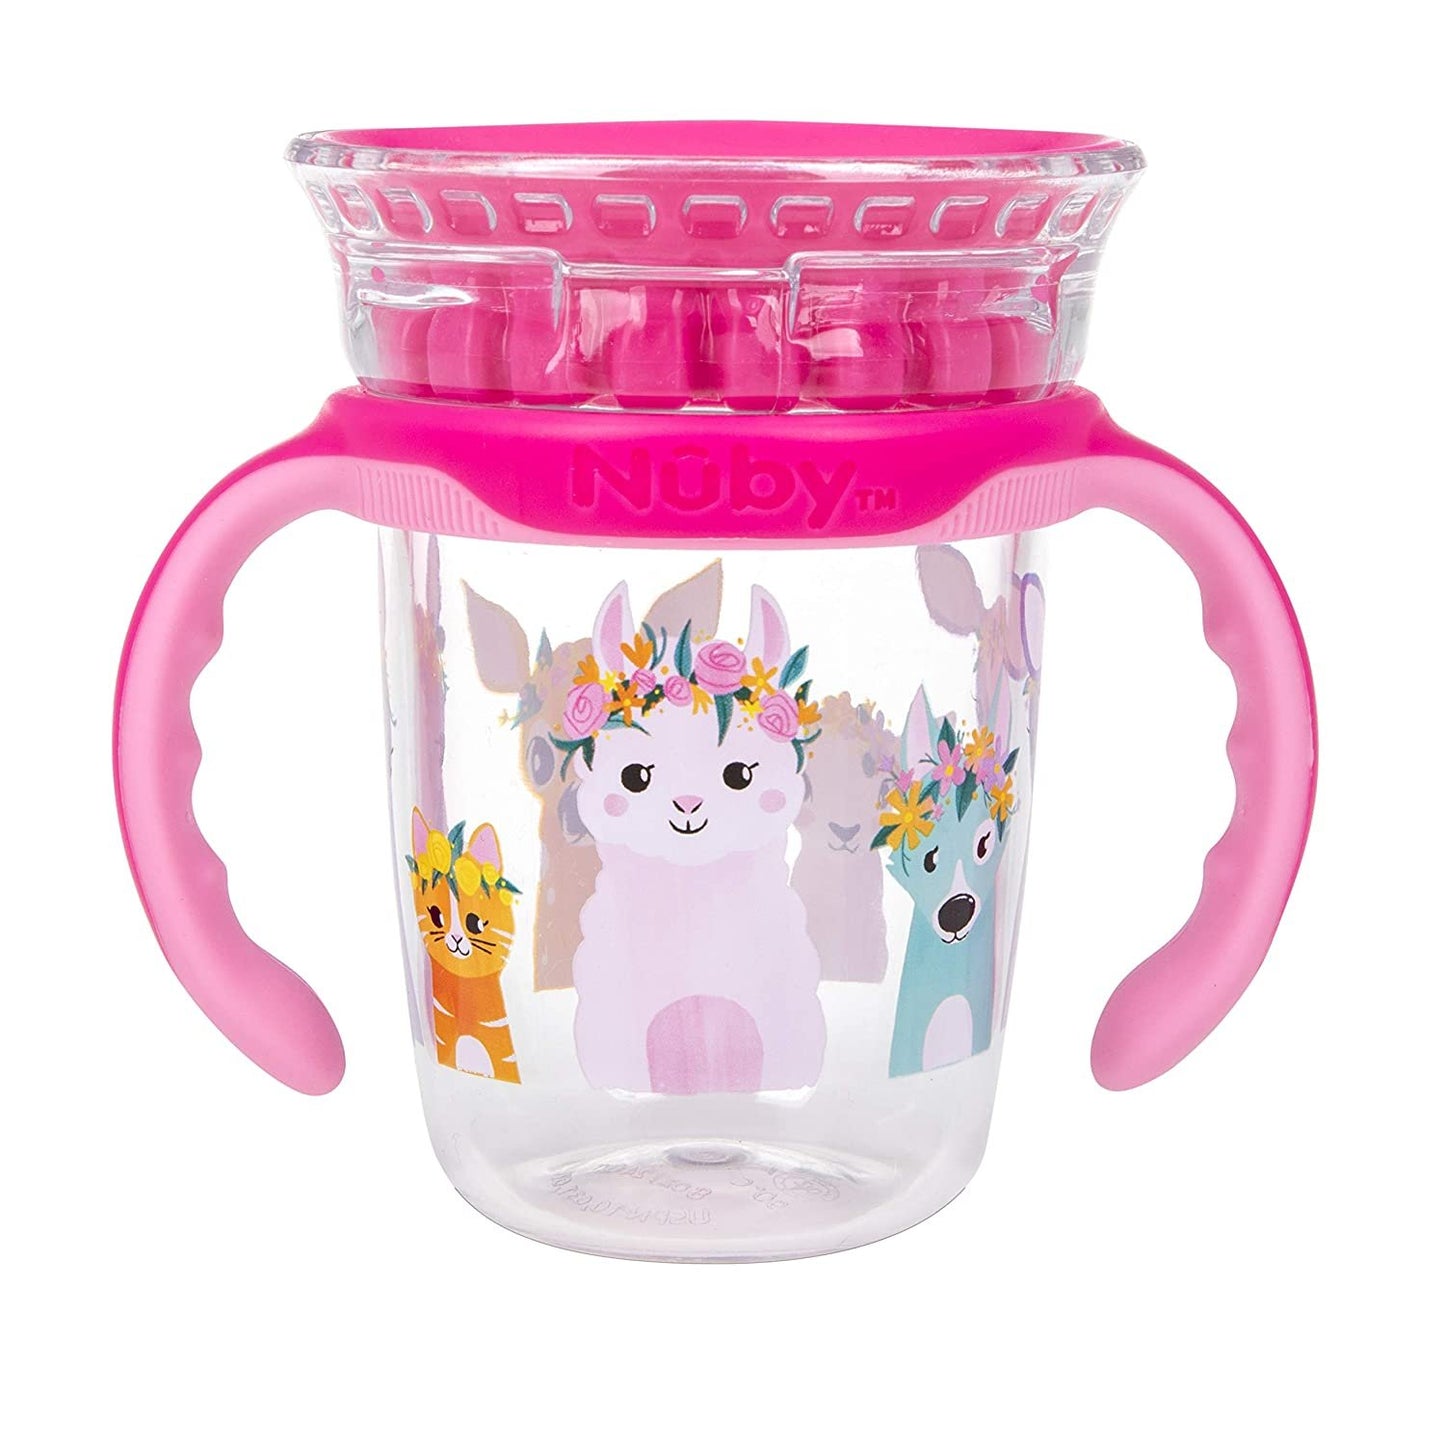 Luv N Care/NUBY Nuby 360 Edge 2 Stage Drinking Rim Cup with Removable Handles & hygienic Cover: 8 Oz/ 240 Ml, 12M+, Flower Crowns, Pink